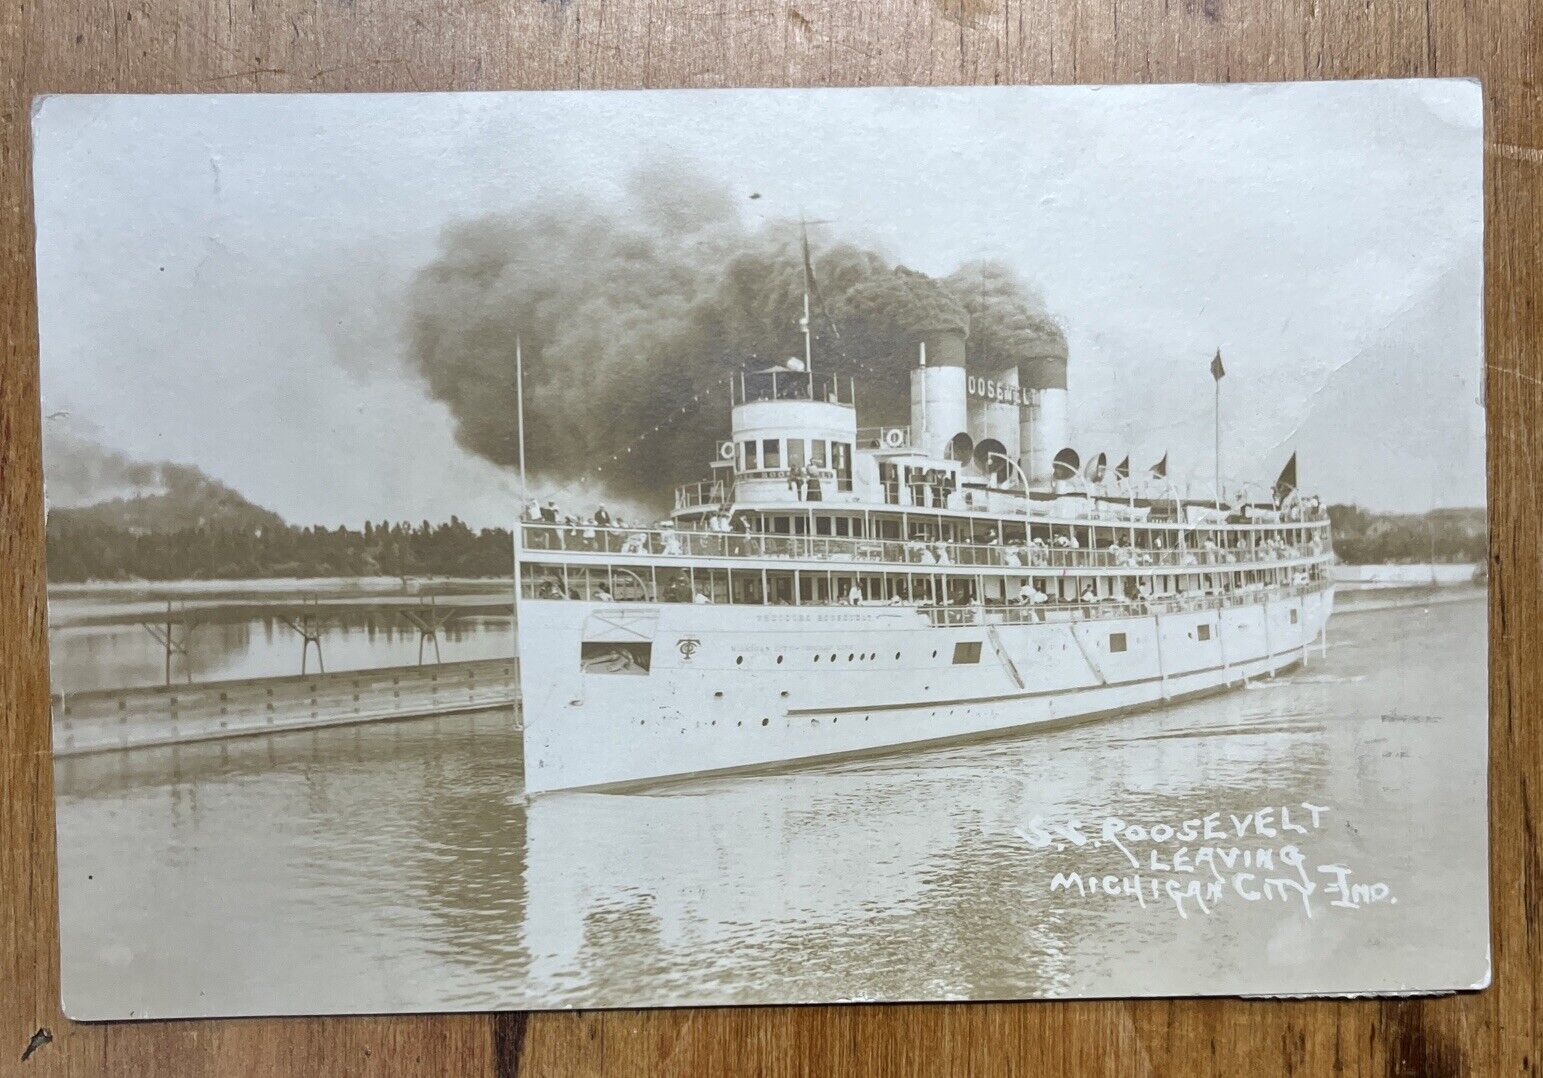 S.S. Roosevelt Steamship Leaving Michigan City Indiana 1911